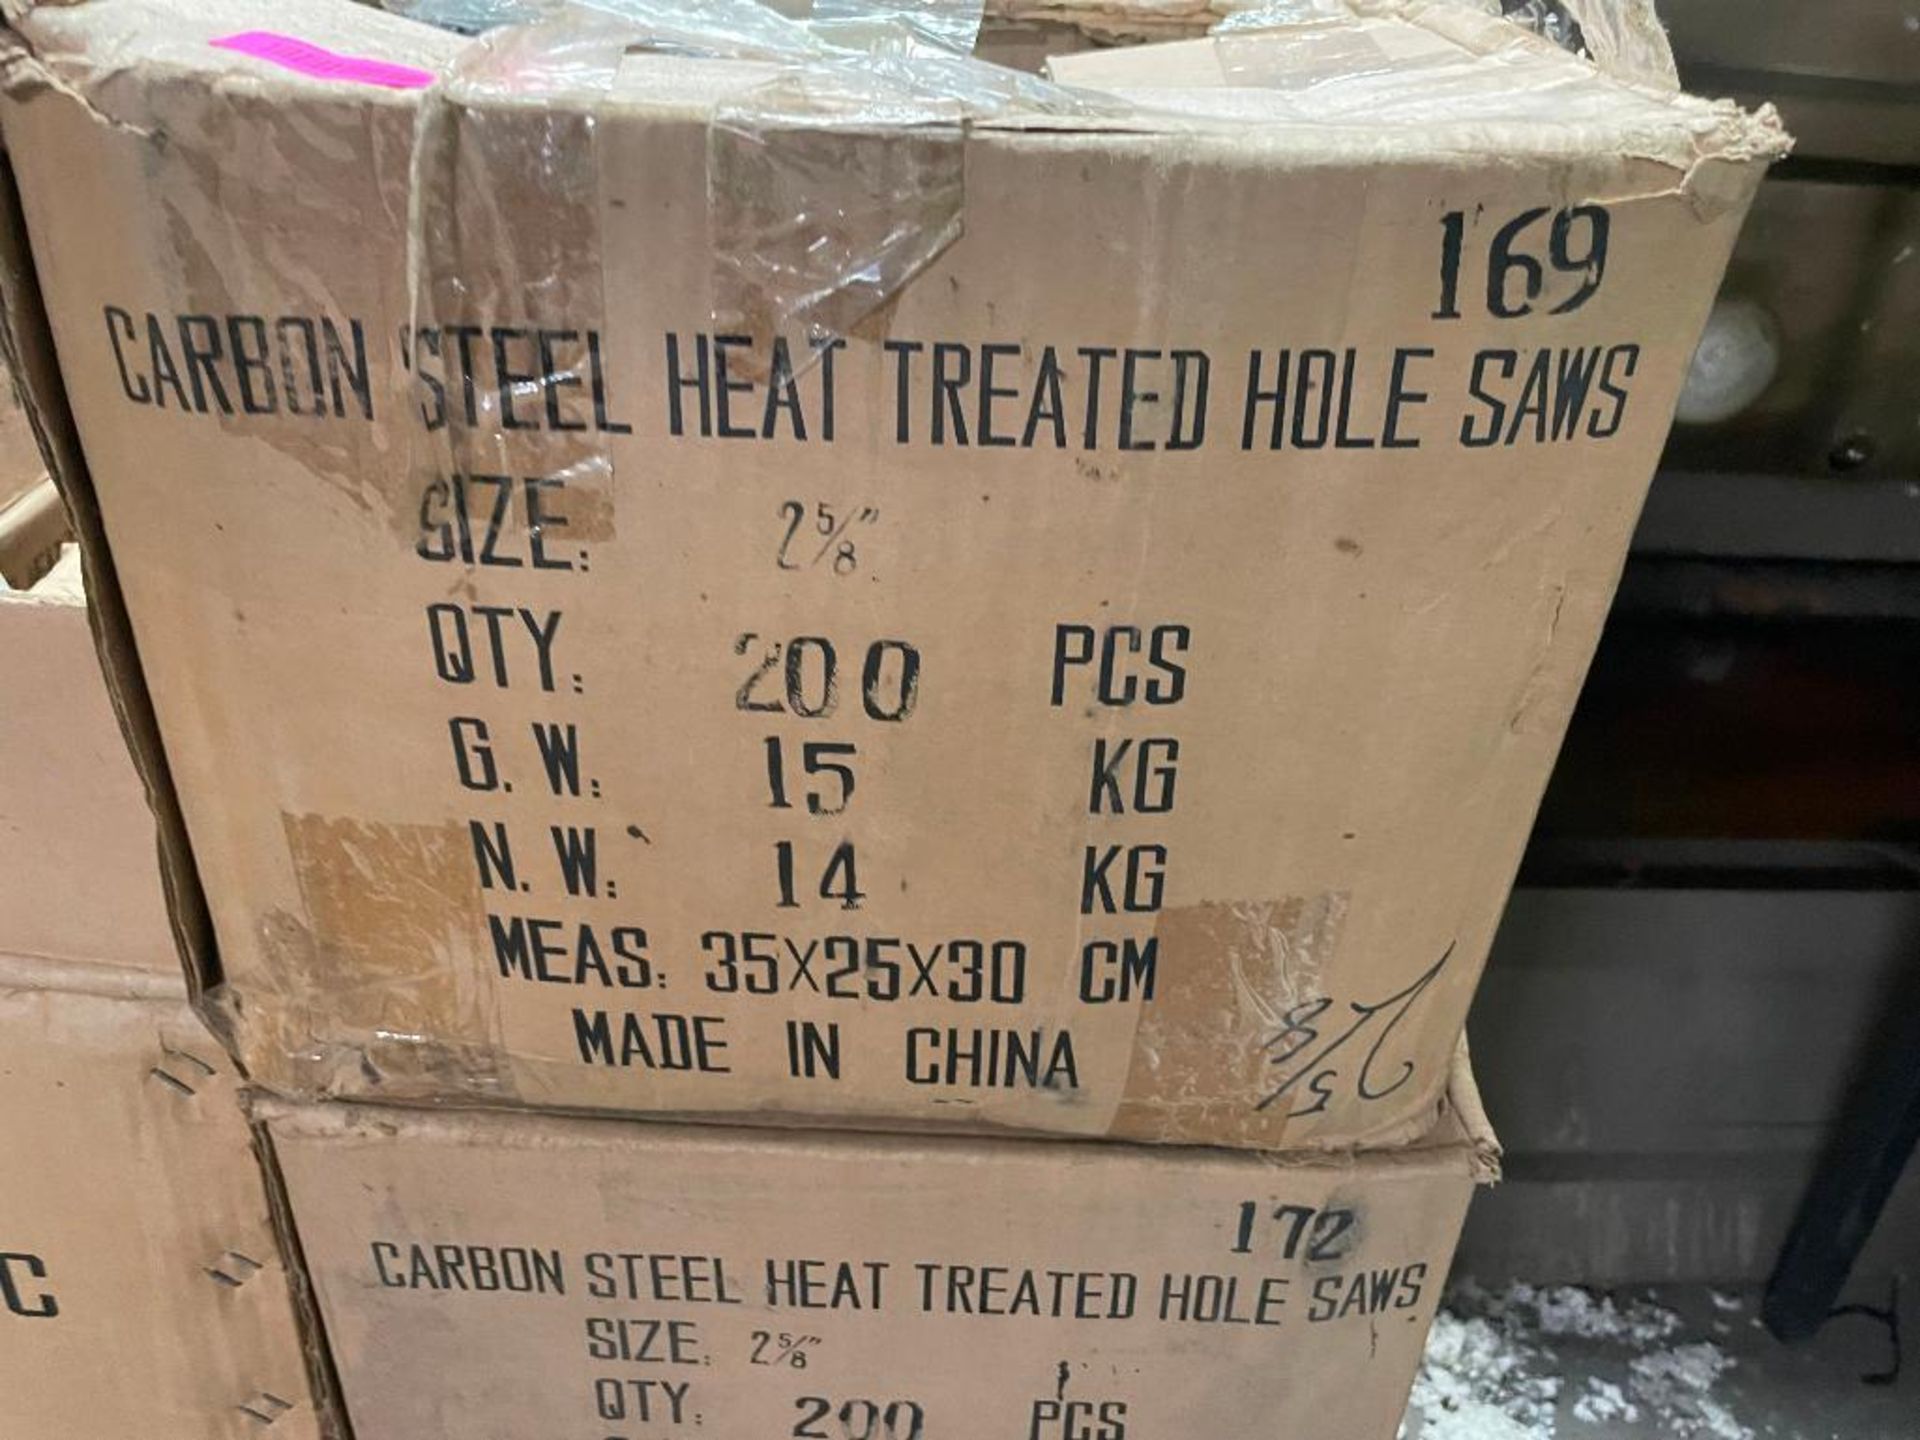 (3) CASES OF 2 5/8" CARBON STEEL HEAT TREATED HOLE SAWS. ADDITIONAL INFORMATION 200 PER CASE, 600 IN - Image 3 of 4